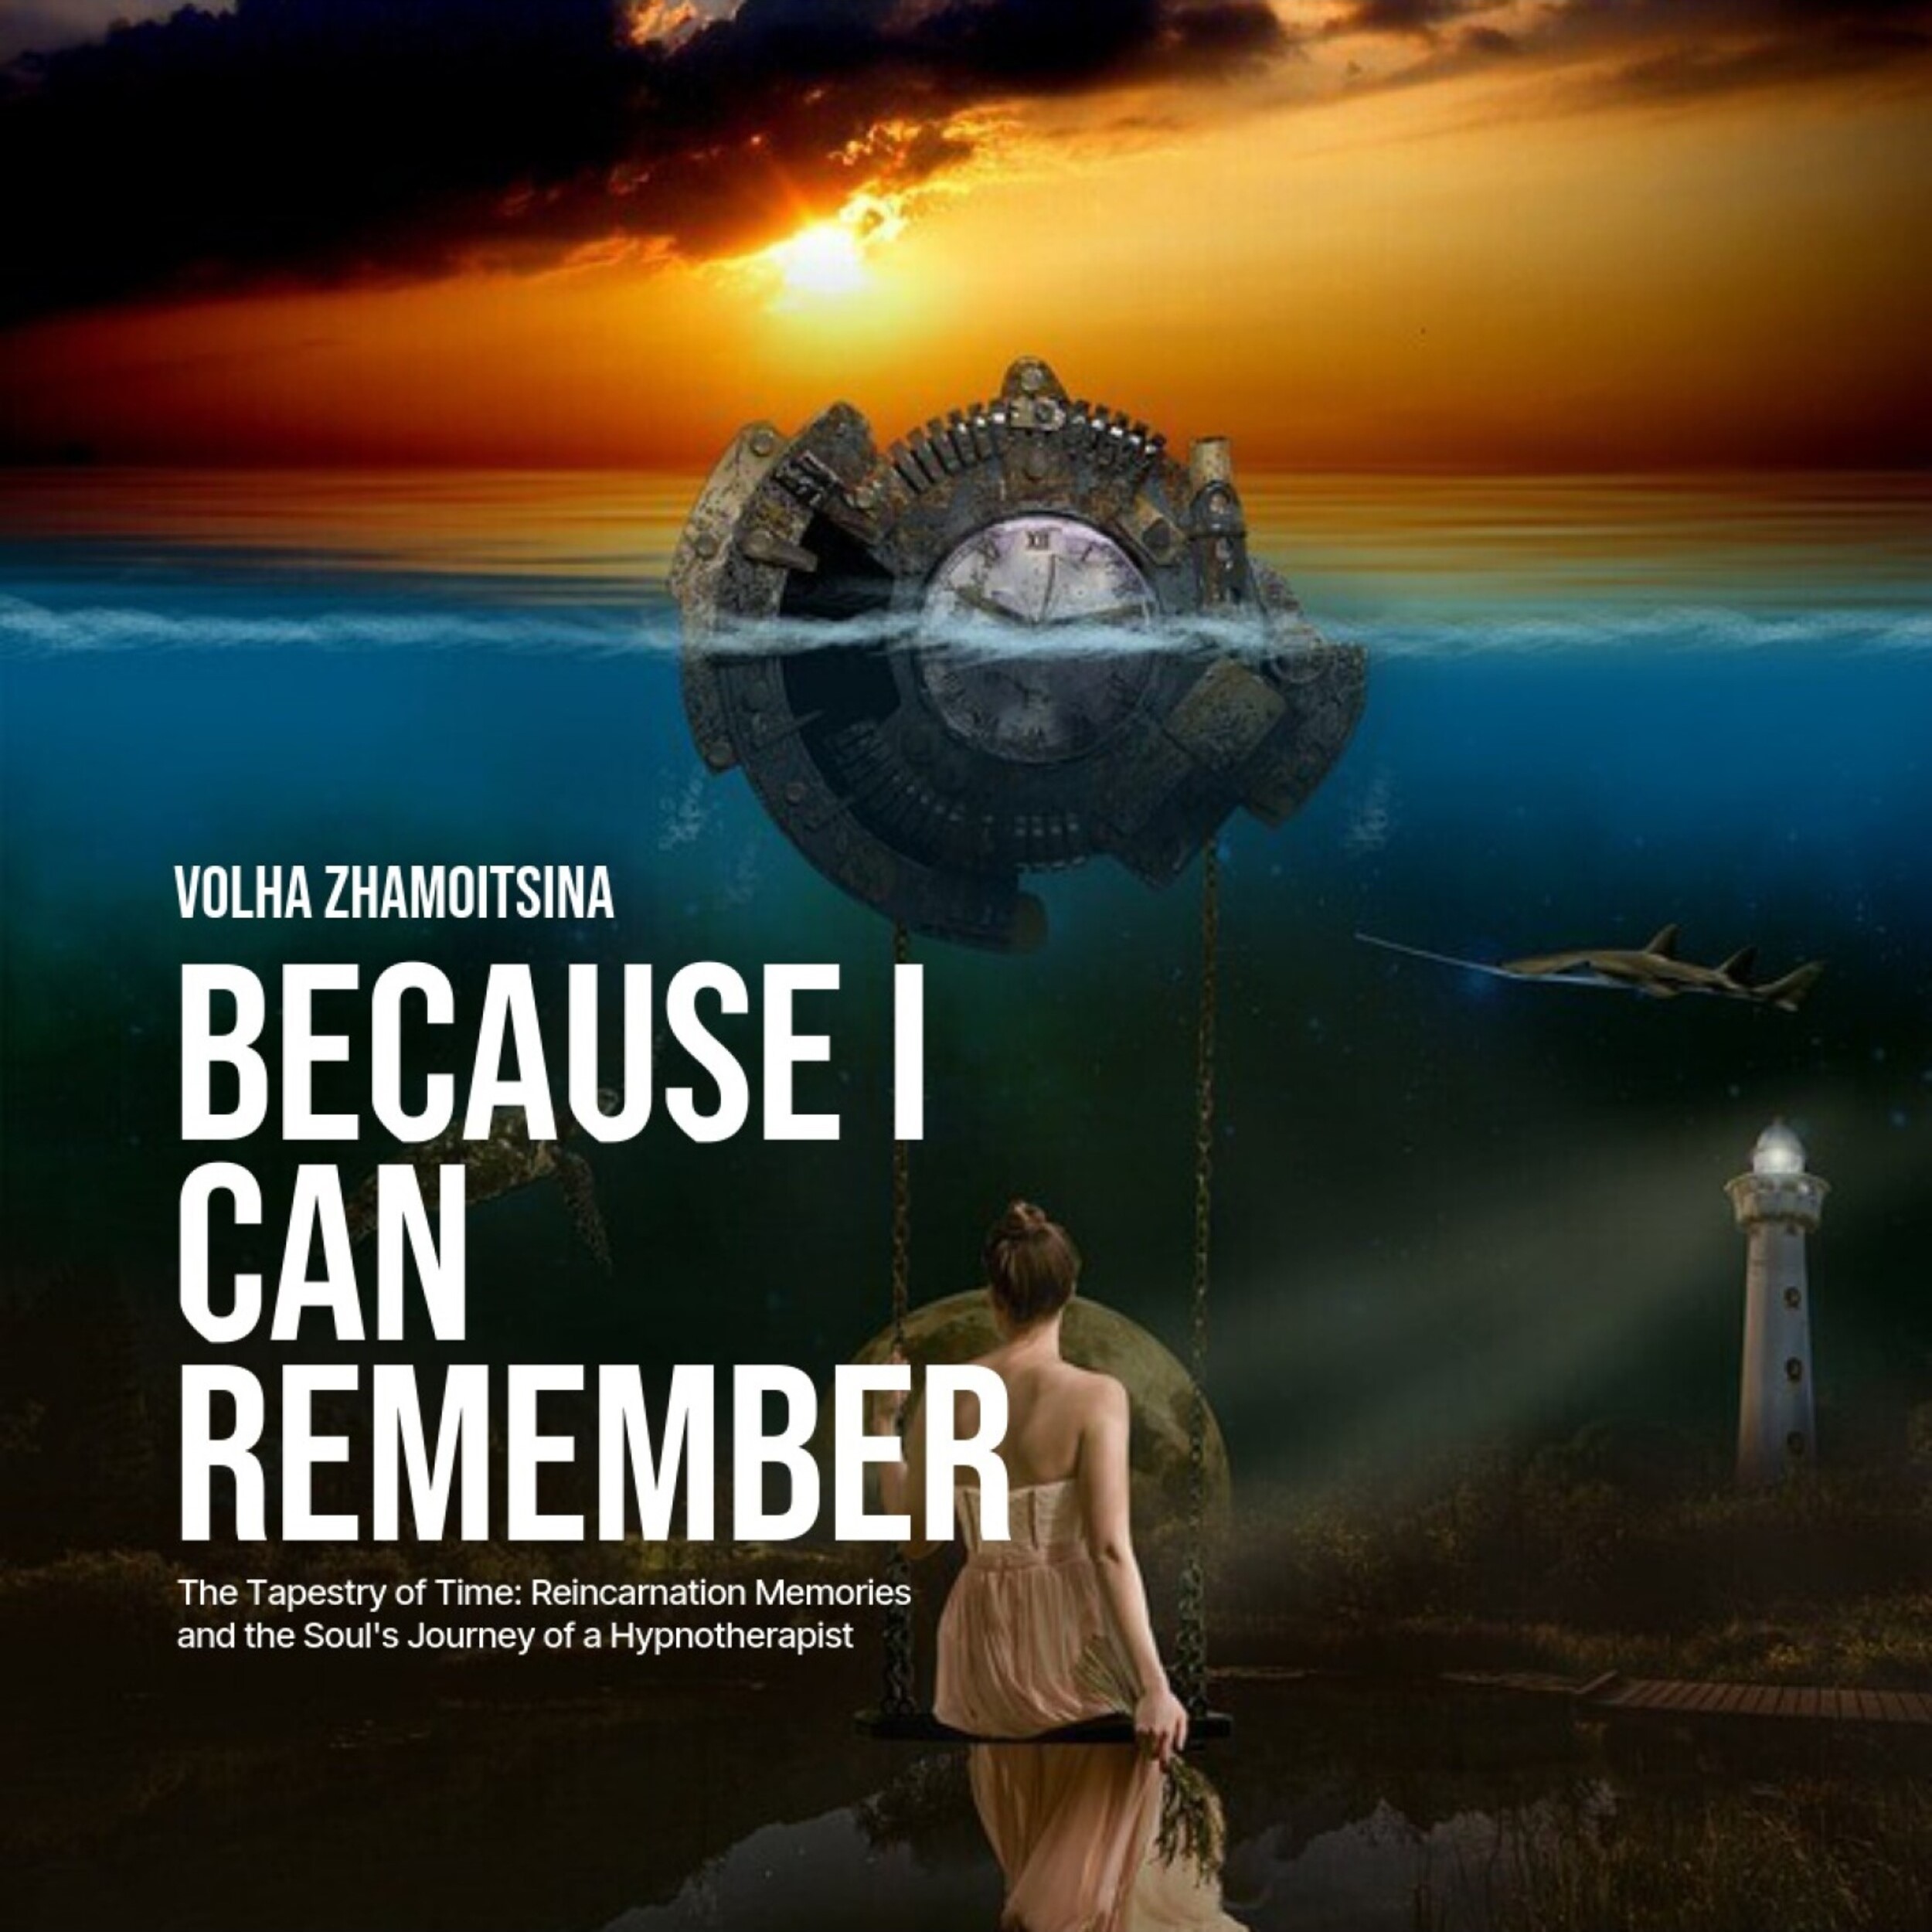 Book "BECAUSE I CAN REMEMBER" thumbnail